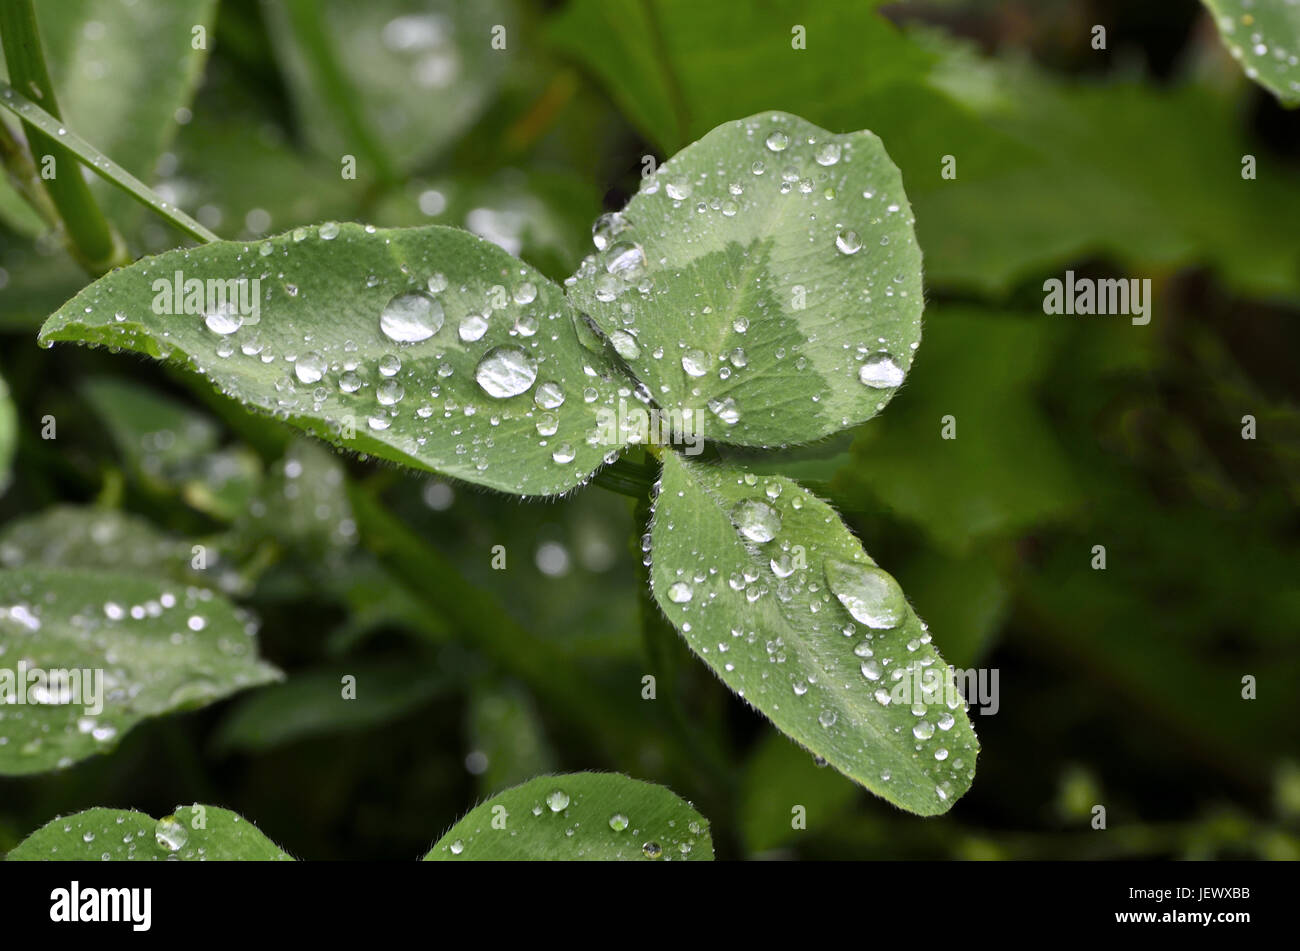 Green clover leaf with drops of water Stock Photo